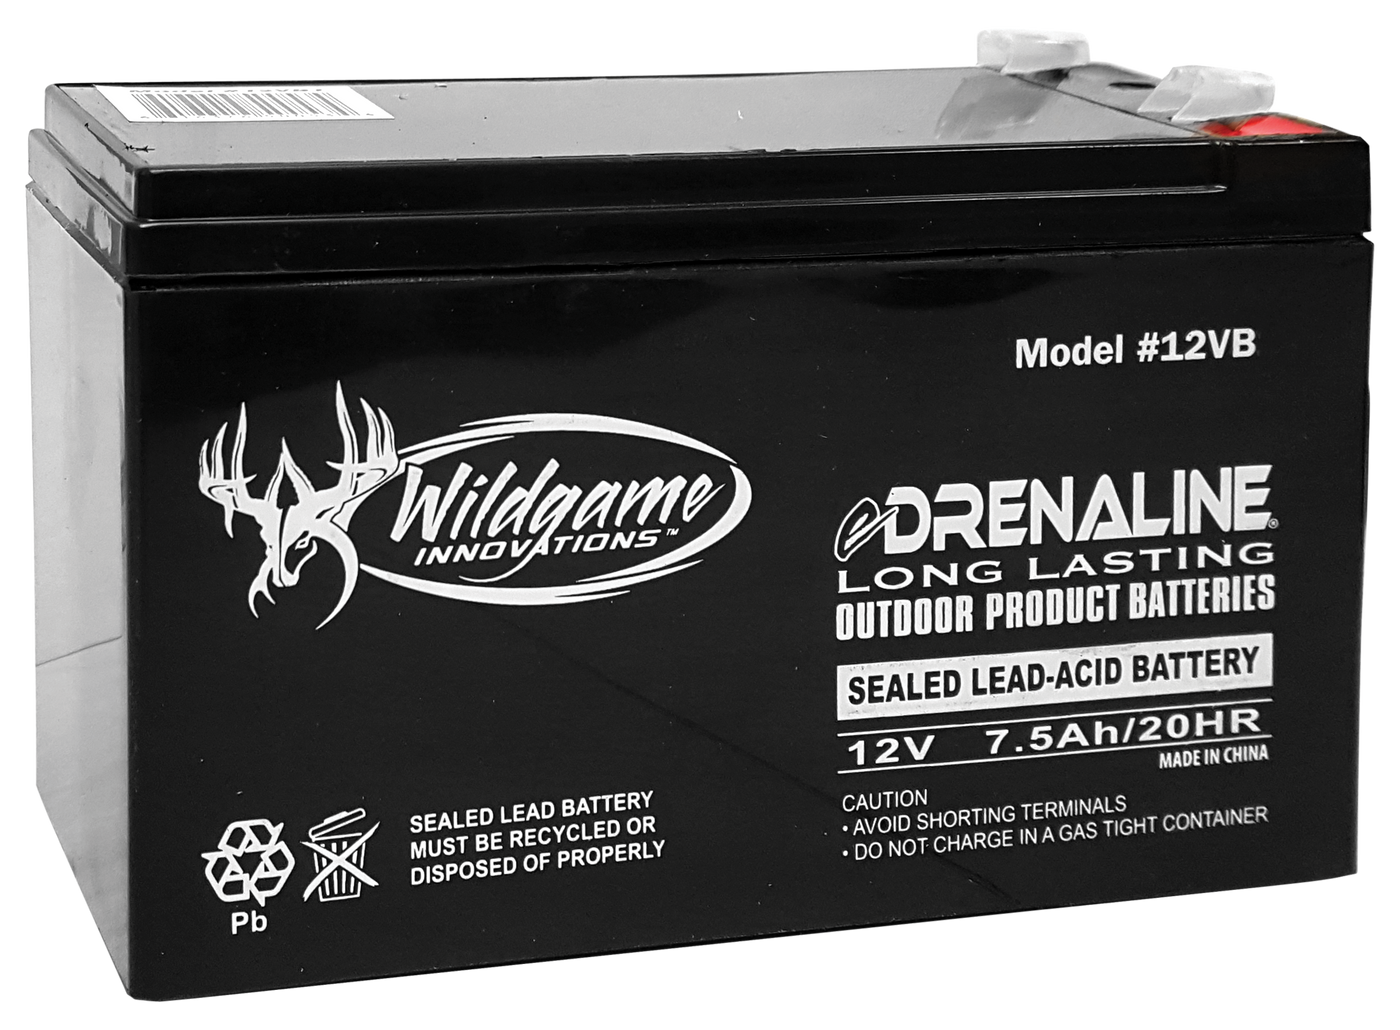 Wildgame Innovations Gsm Rechargeable Battery, Wgi-wgibt0011 12v Edrenaline Rechargeable Battery